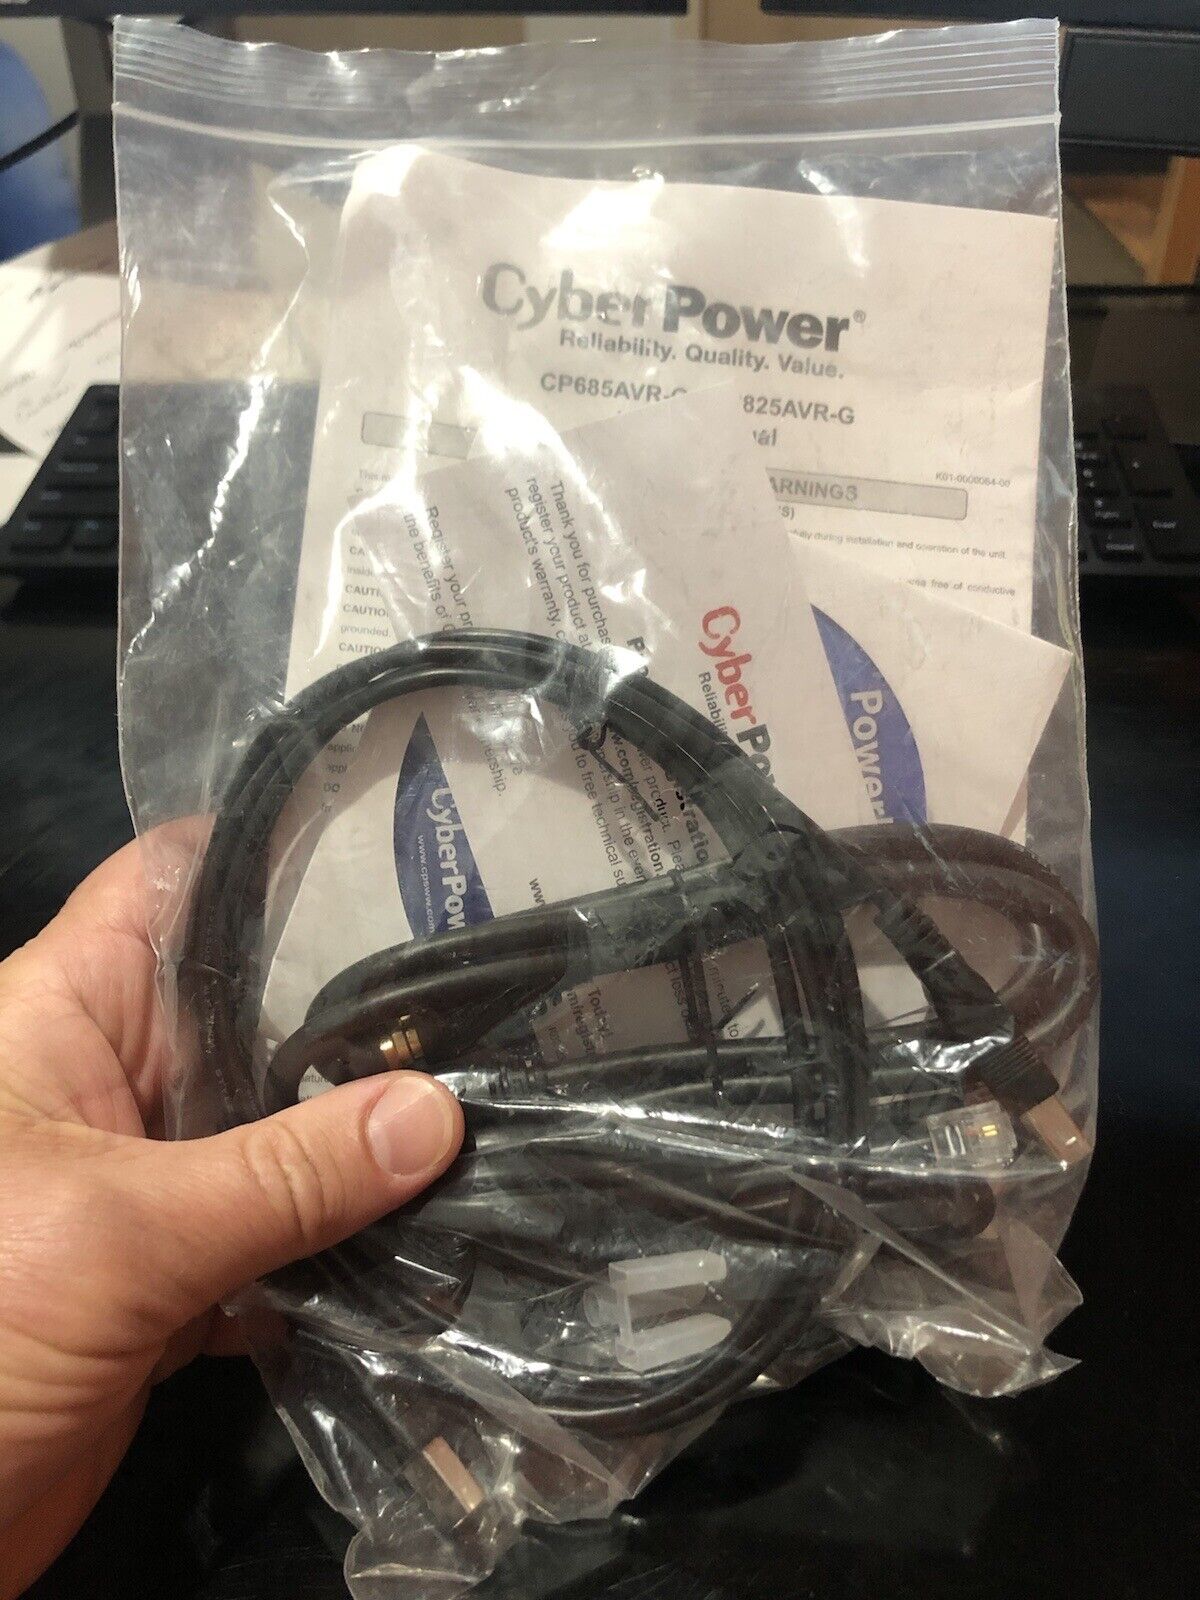 CyberPower PowerPanel Management Software CD Personal Edition Manual Cables